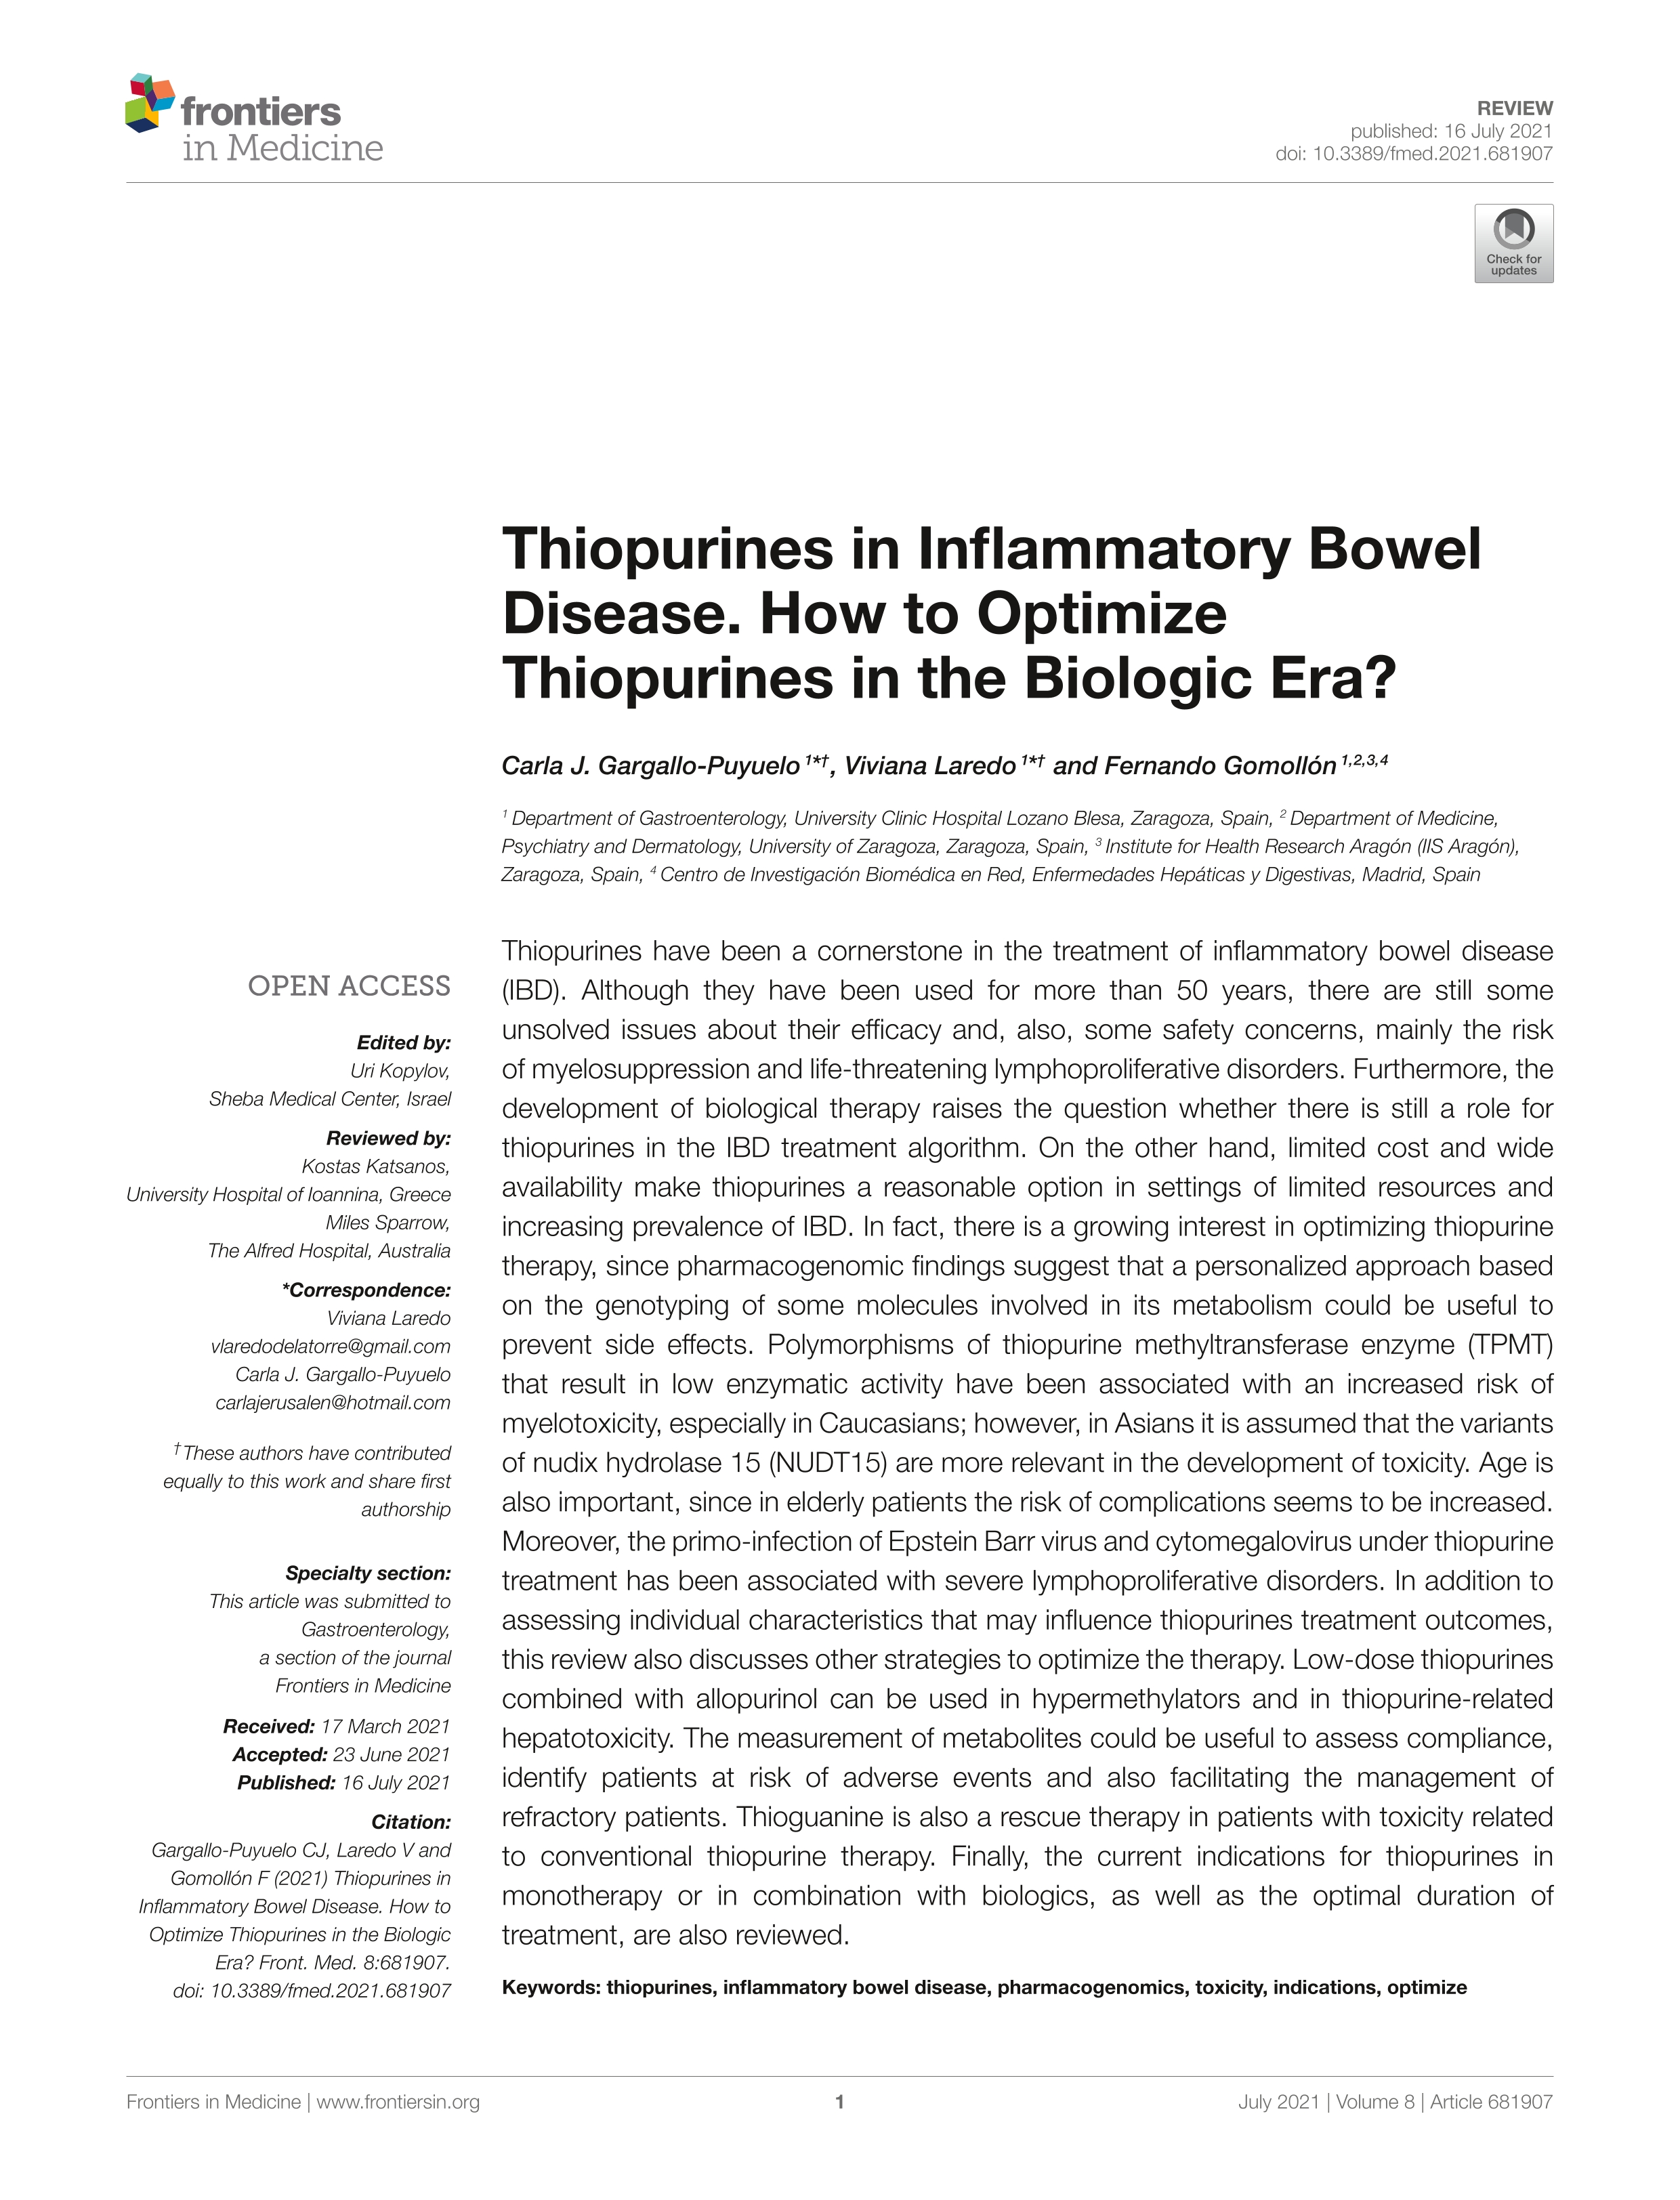 Thiopurines in inflammatory bowel disease. How to optimize thiopurines in the biologic era?